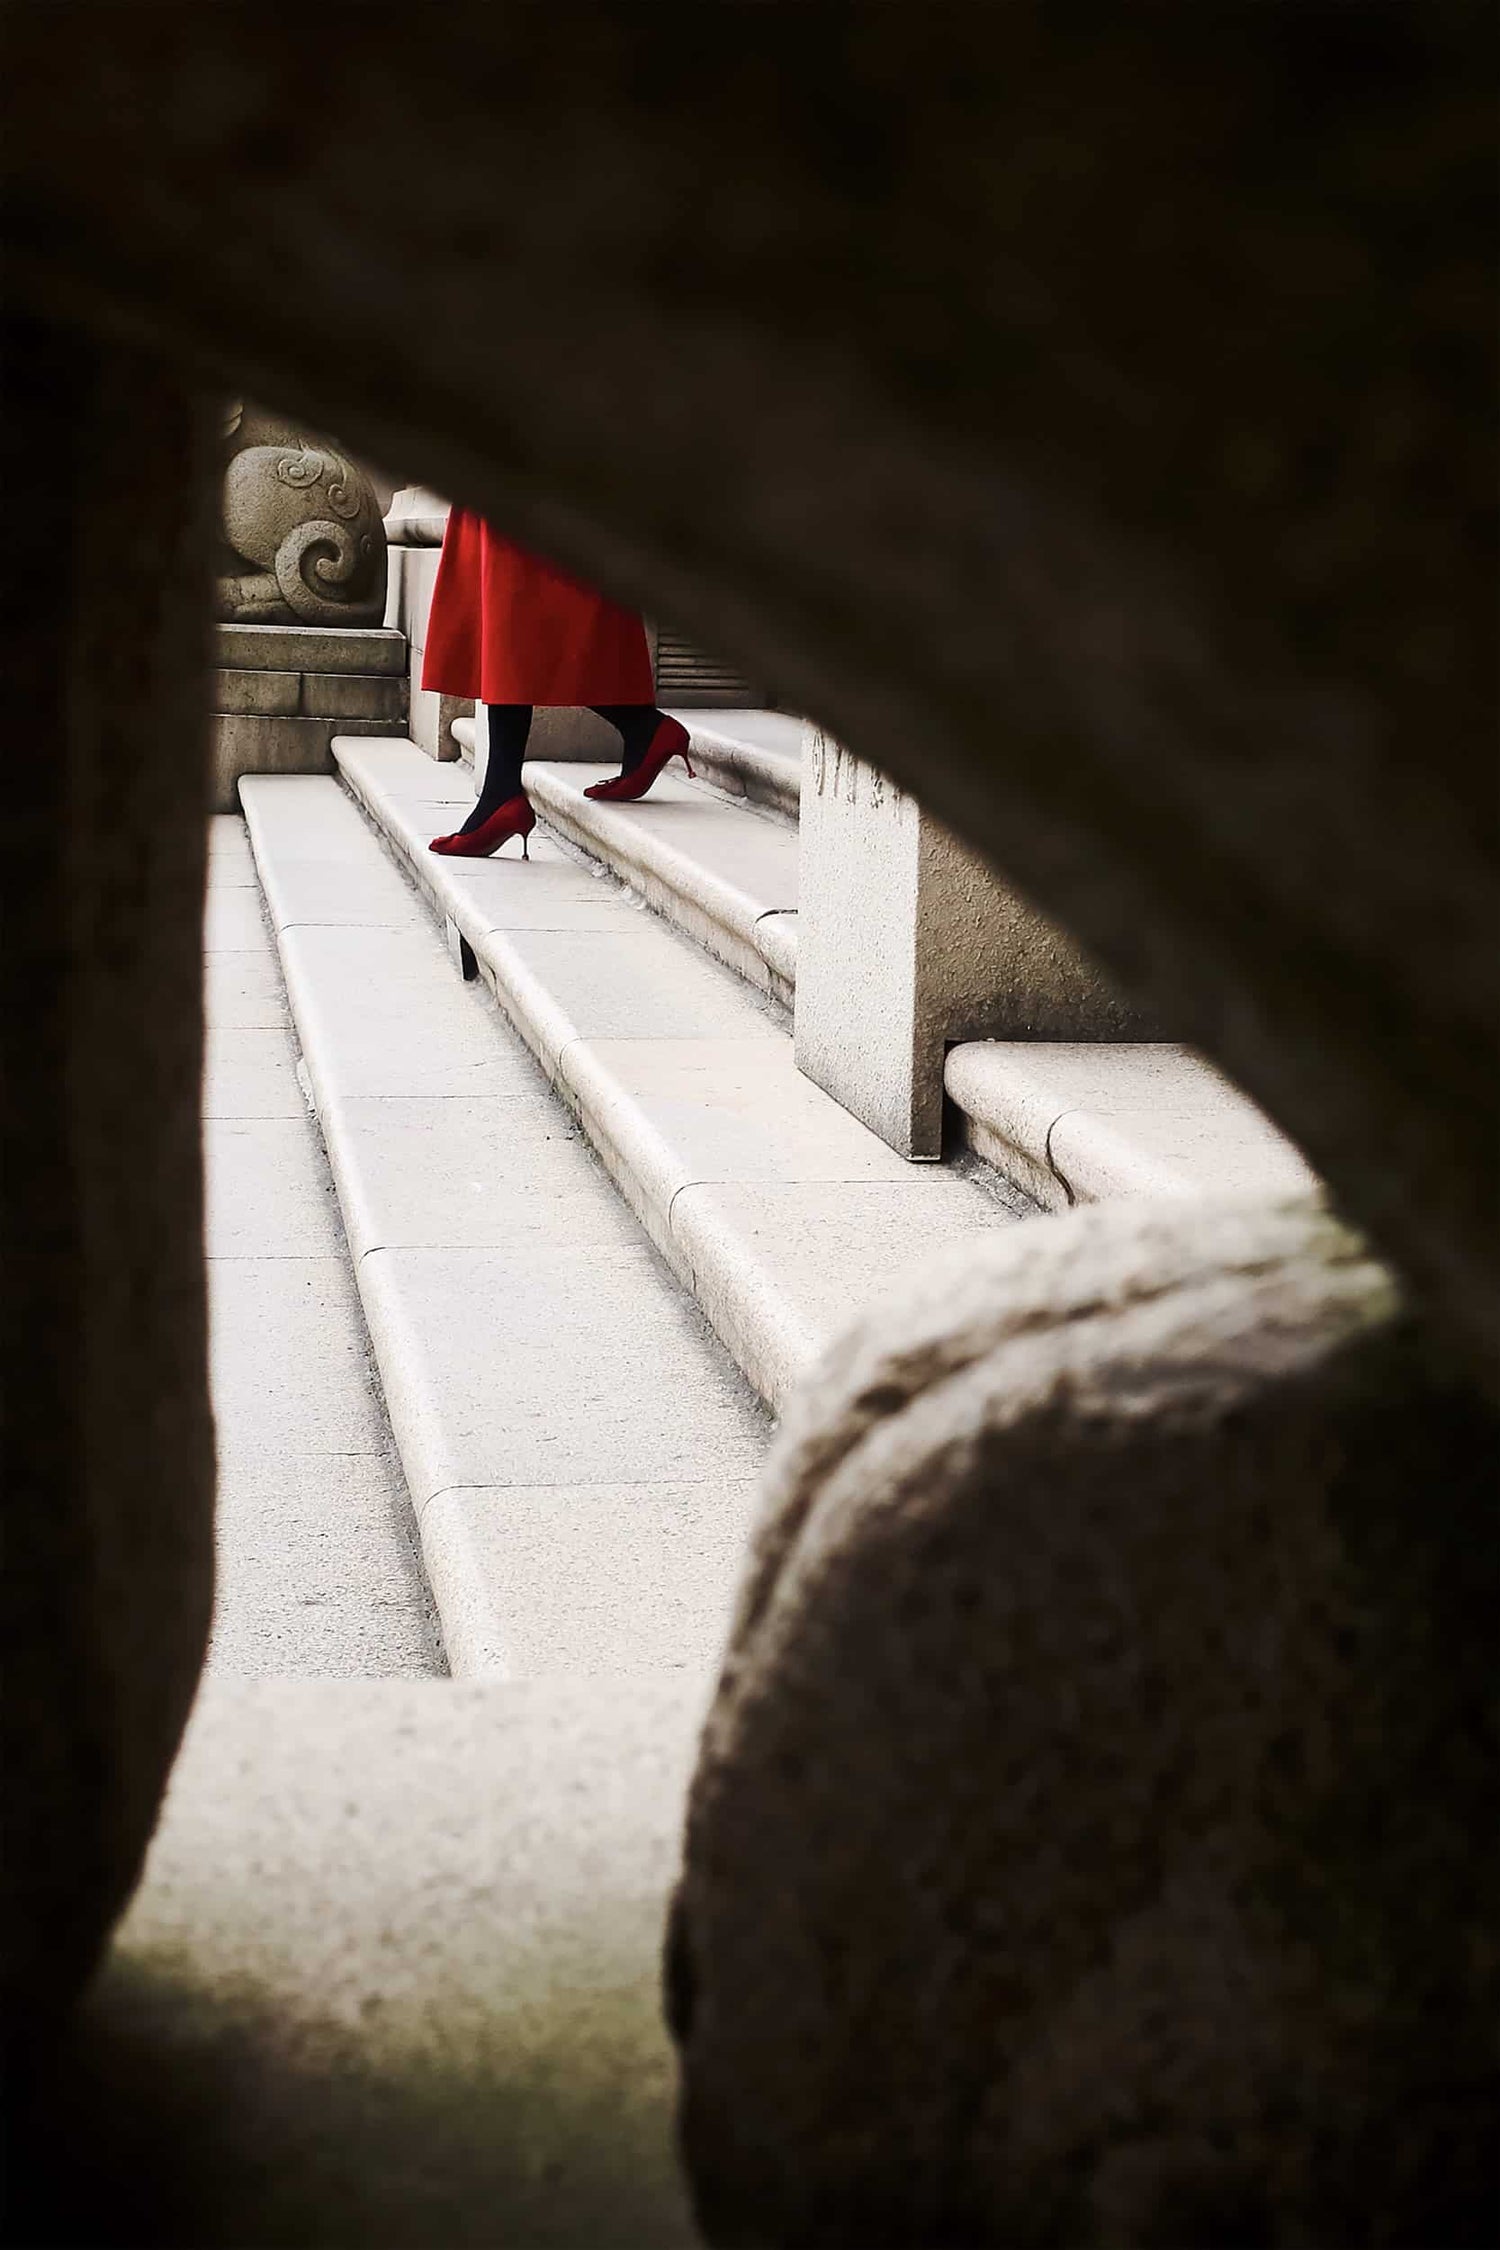 The artpiece 'Dream Girl' by Michael Cai showing a woman in red heels and dress walking down a stone flight of stairs.